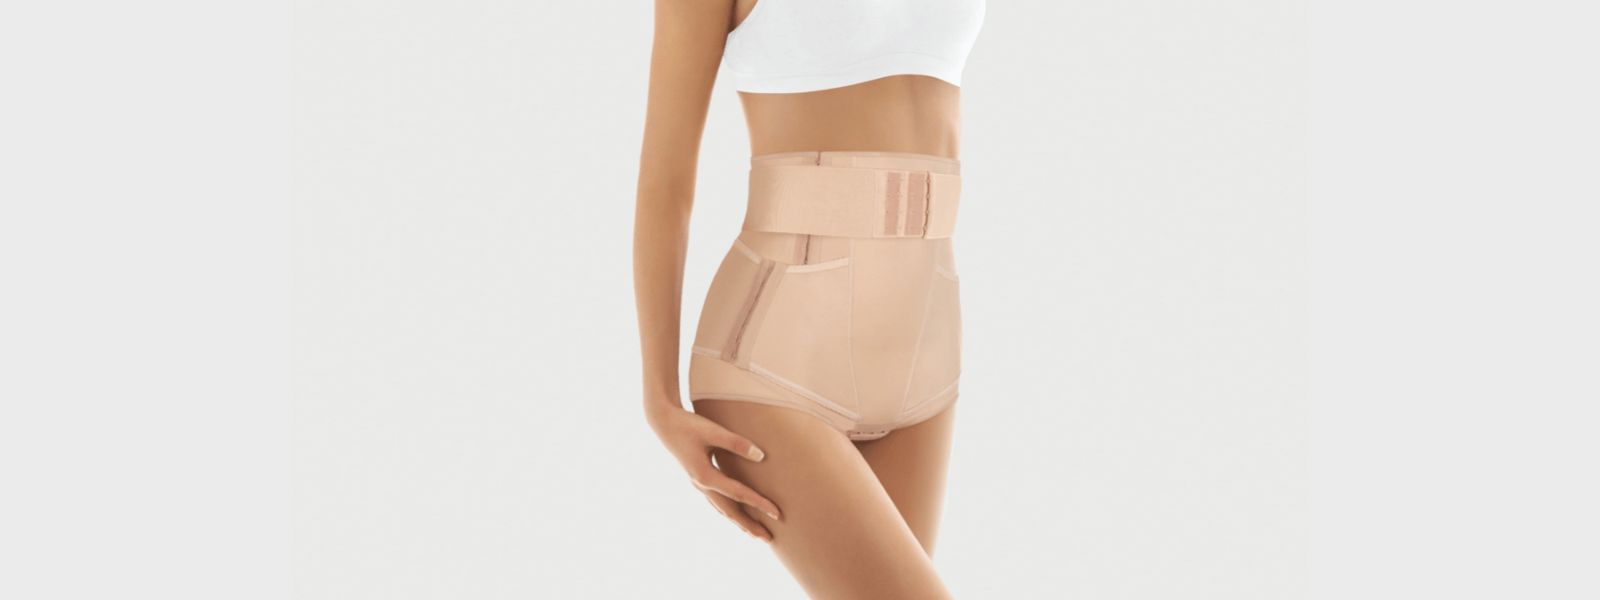 Compression garments after surgery